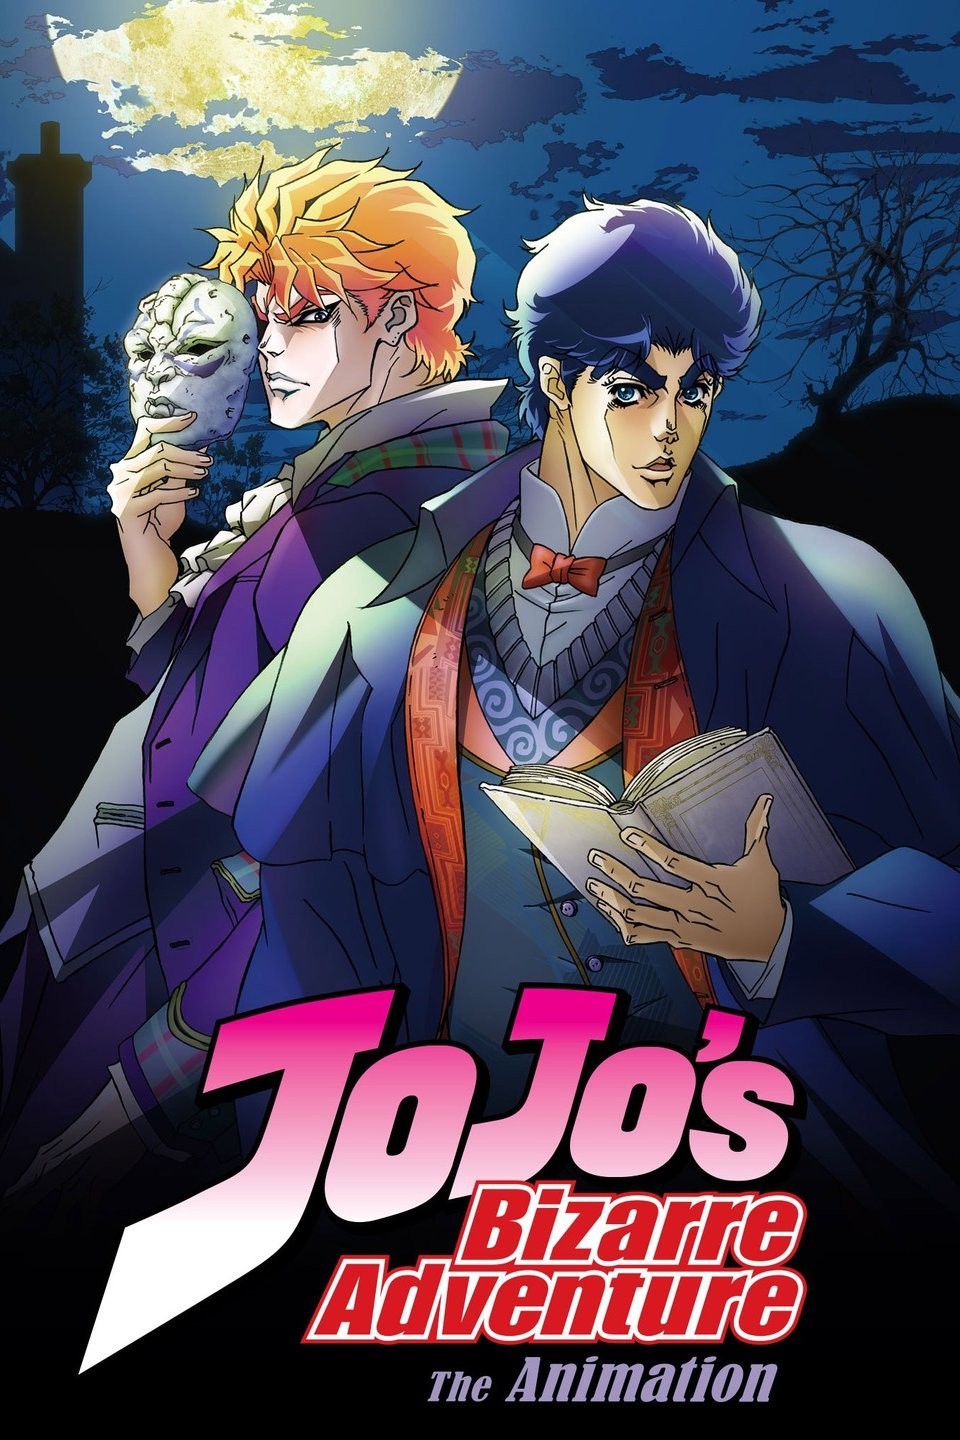 The new official site for all of Jojos Bizarre Adventure Anime and Manga  is up and running Official confirmation for upcoming event featuring all  the protagonists VAs planned for 442021  ranime